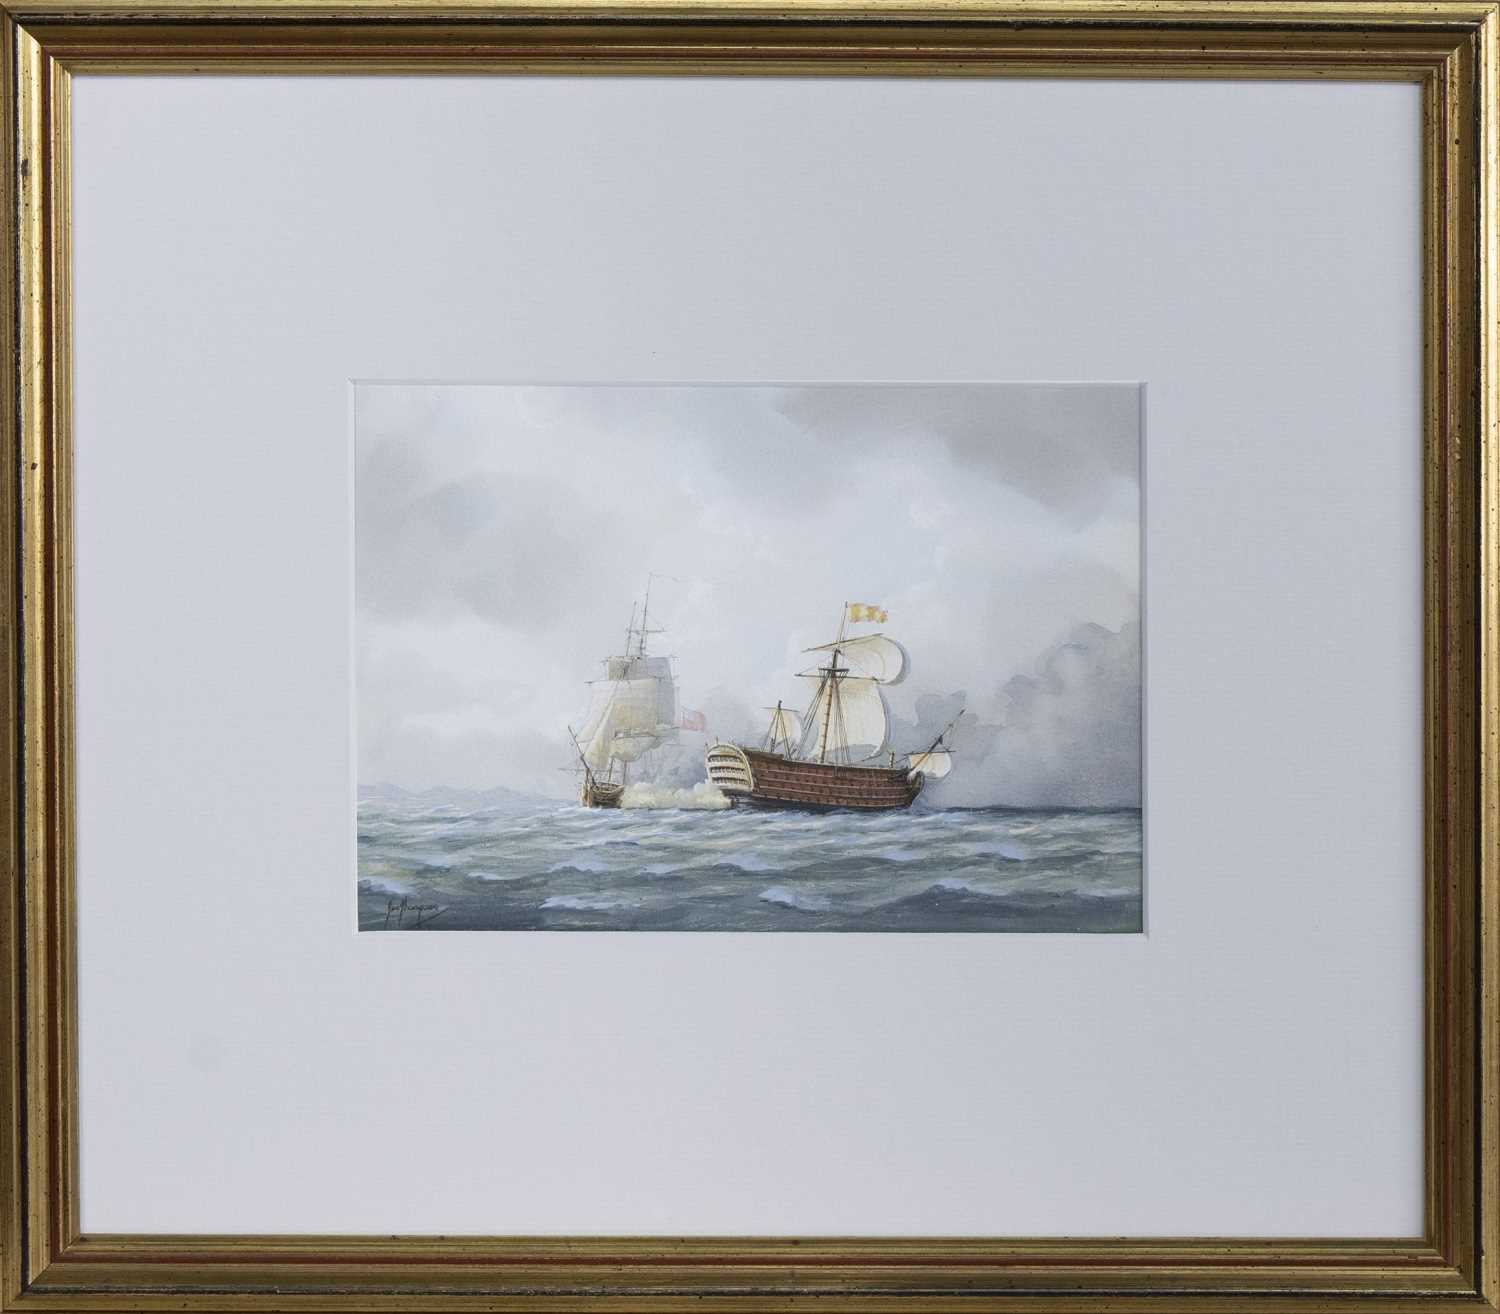 SANTISIMA TRINIDAD, ENGAGED WITH HMS TERPSICHORE, A WATERCOLOUR BY TIM THOMPSON